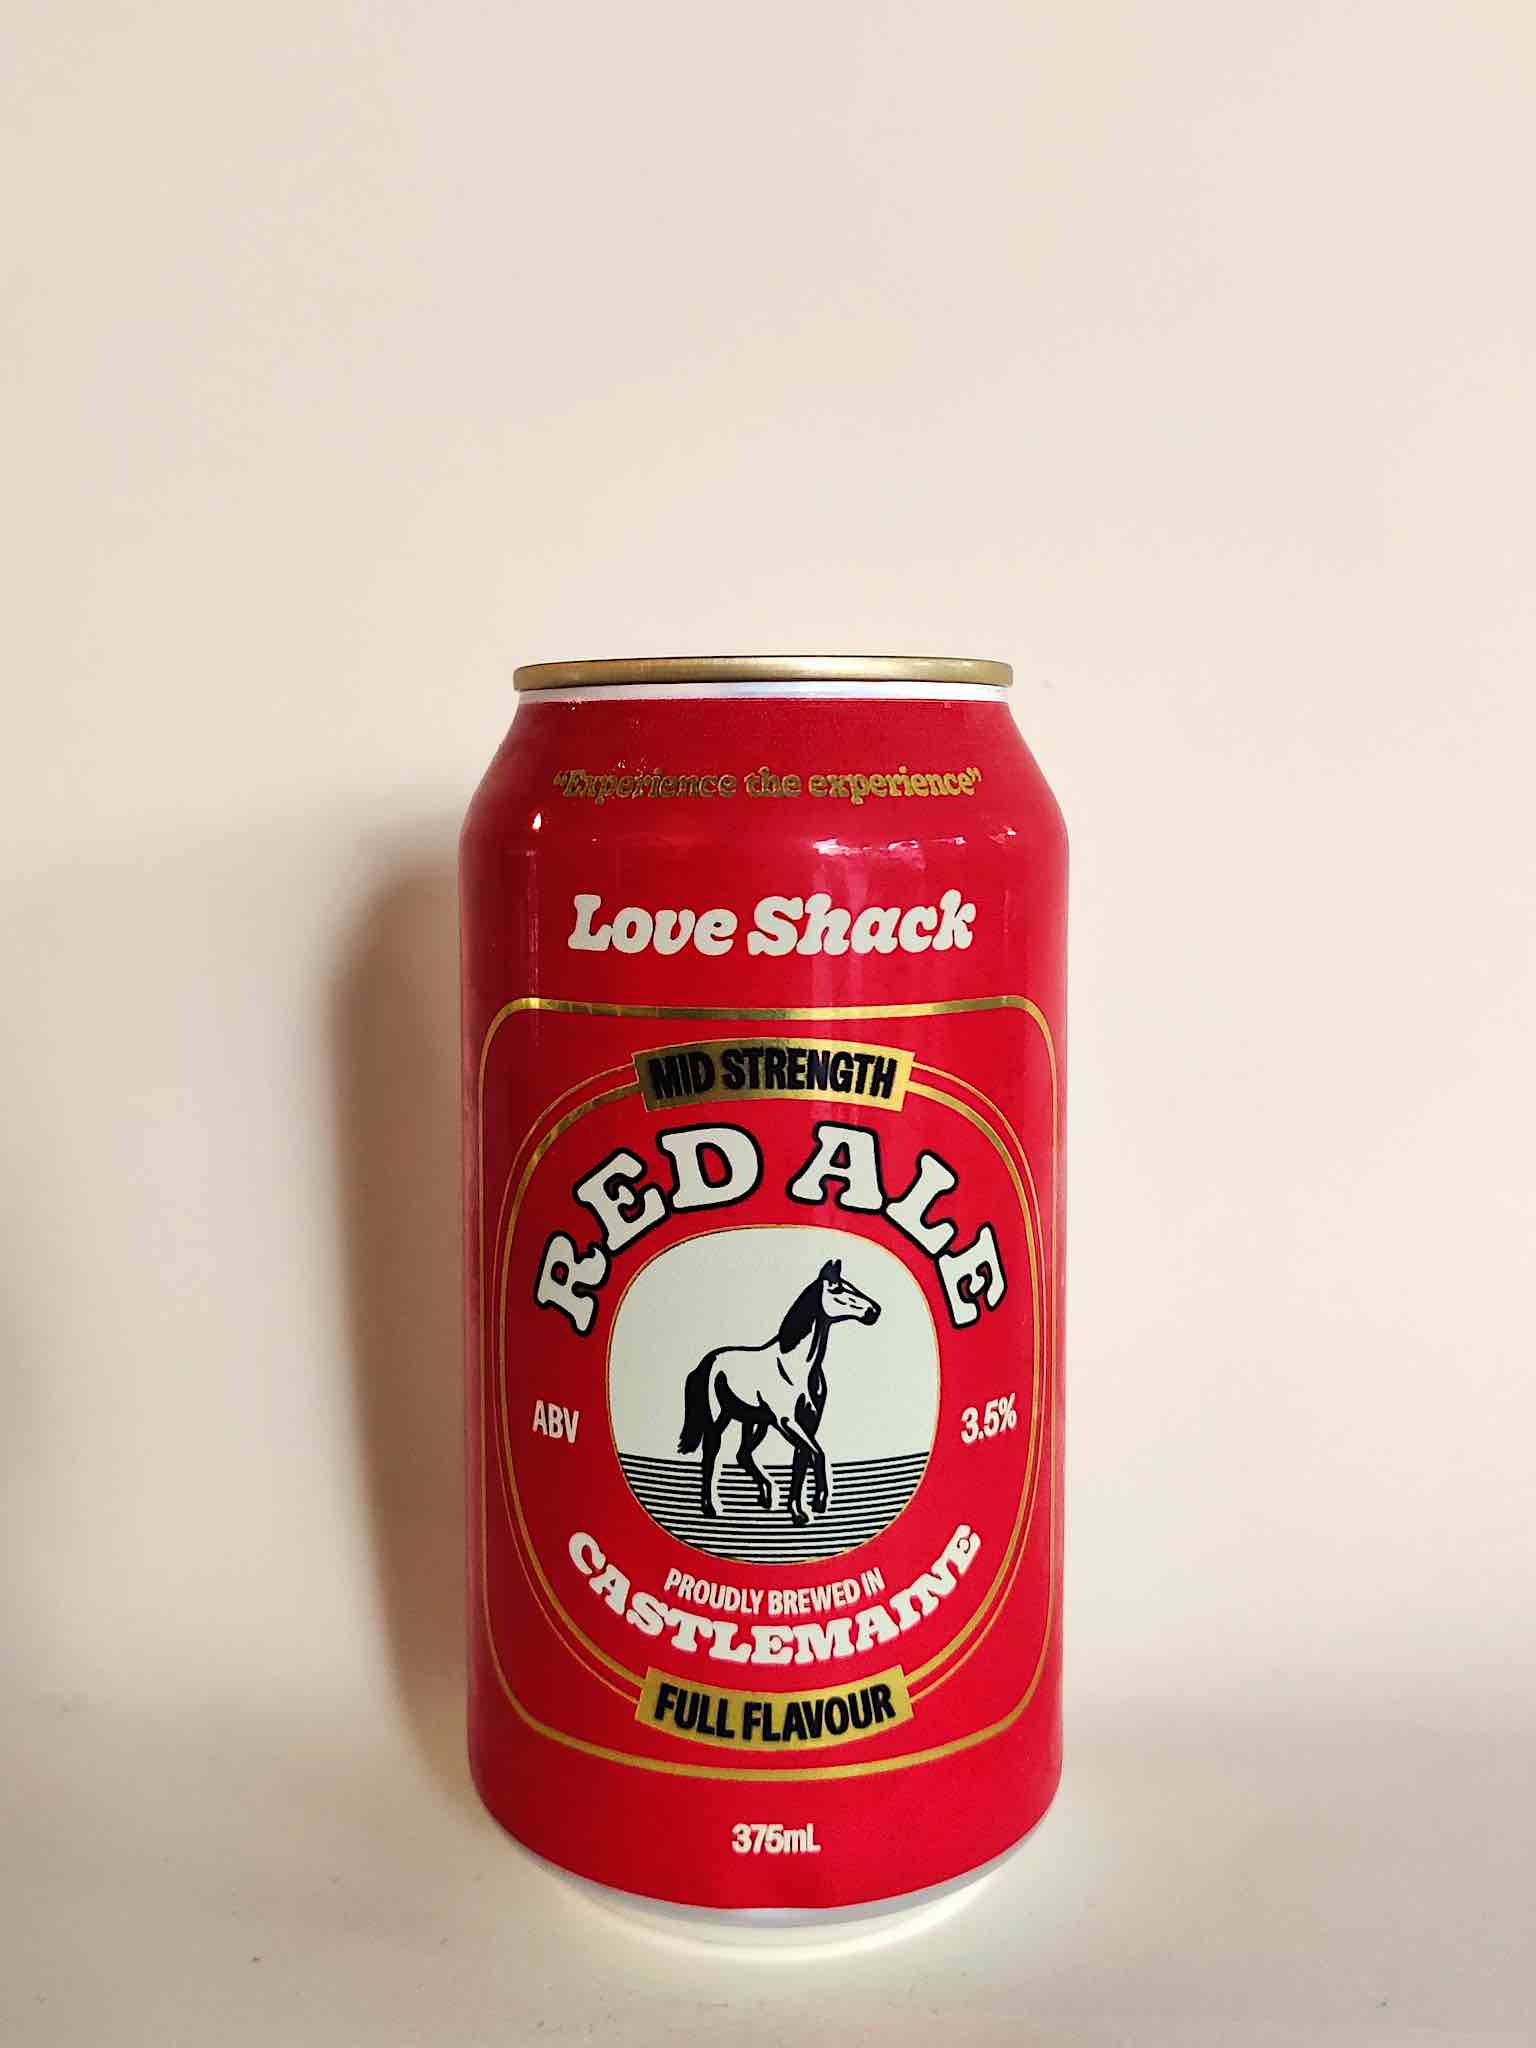 A 375ml can of Love Shack Red Ale from Castlemaine, Victoria.